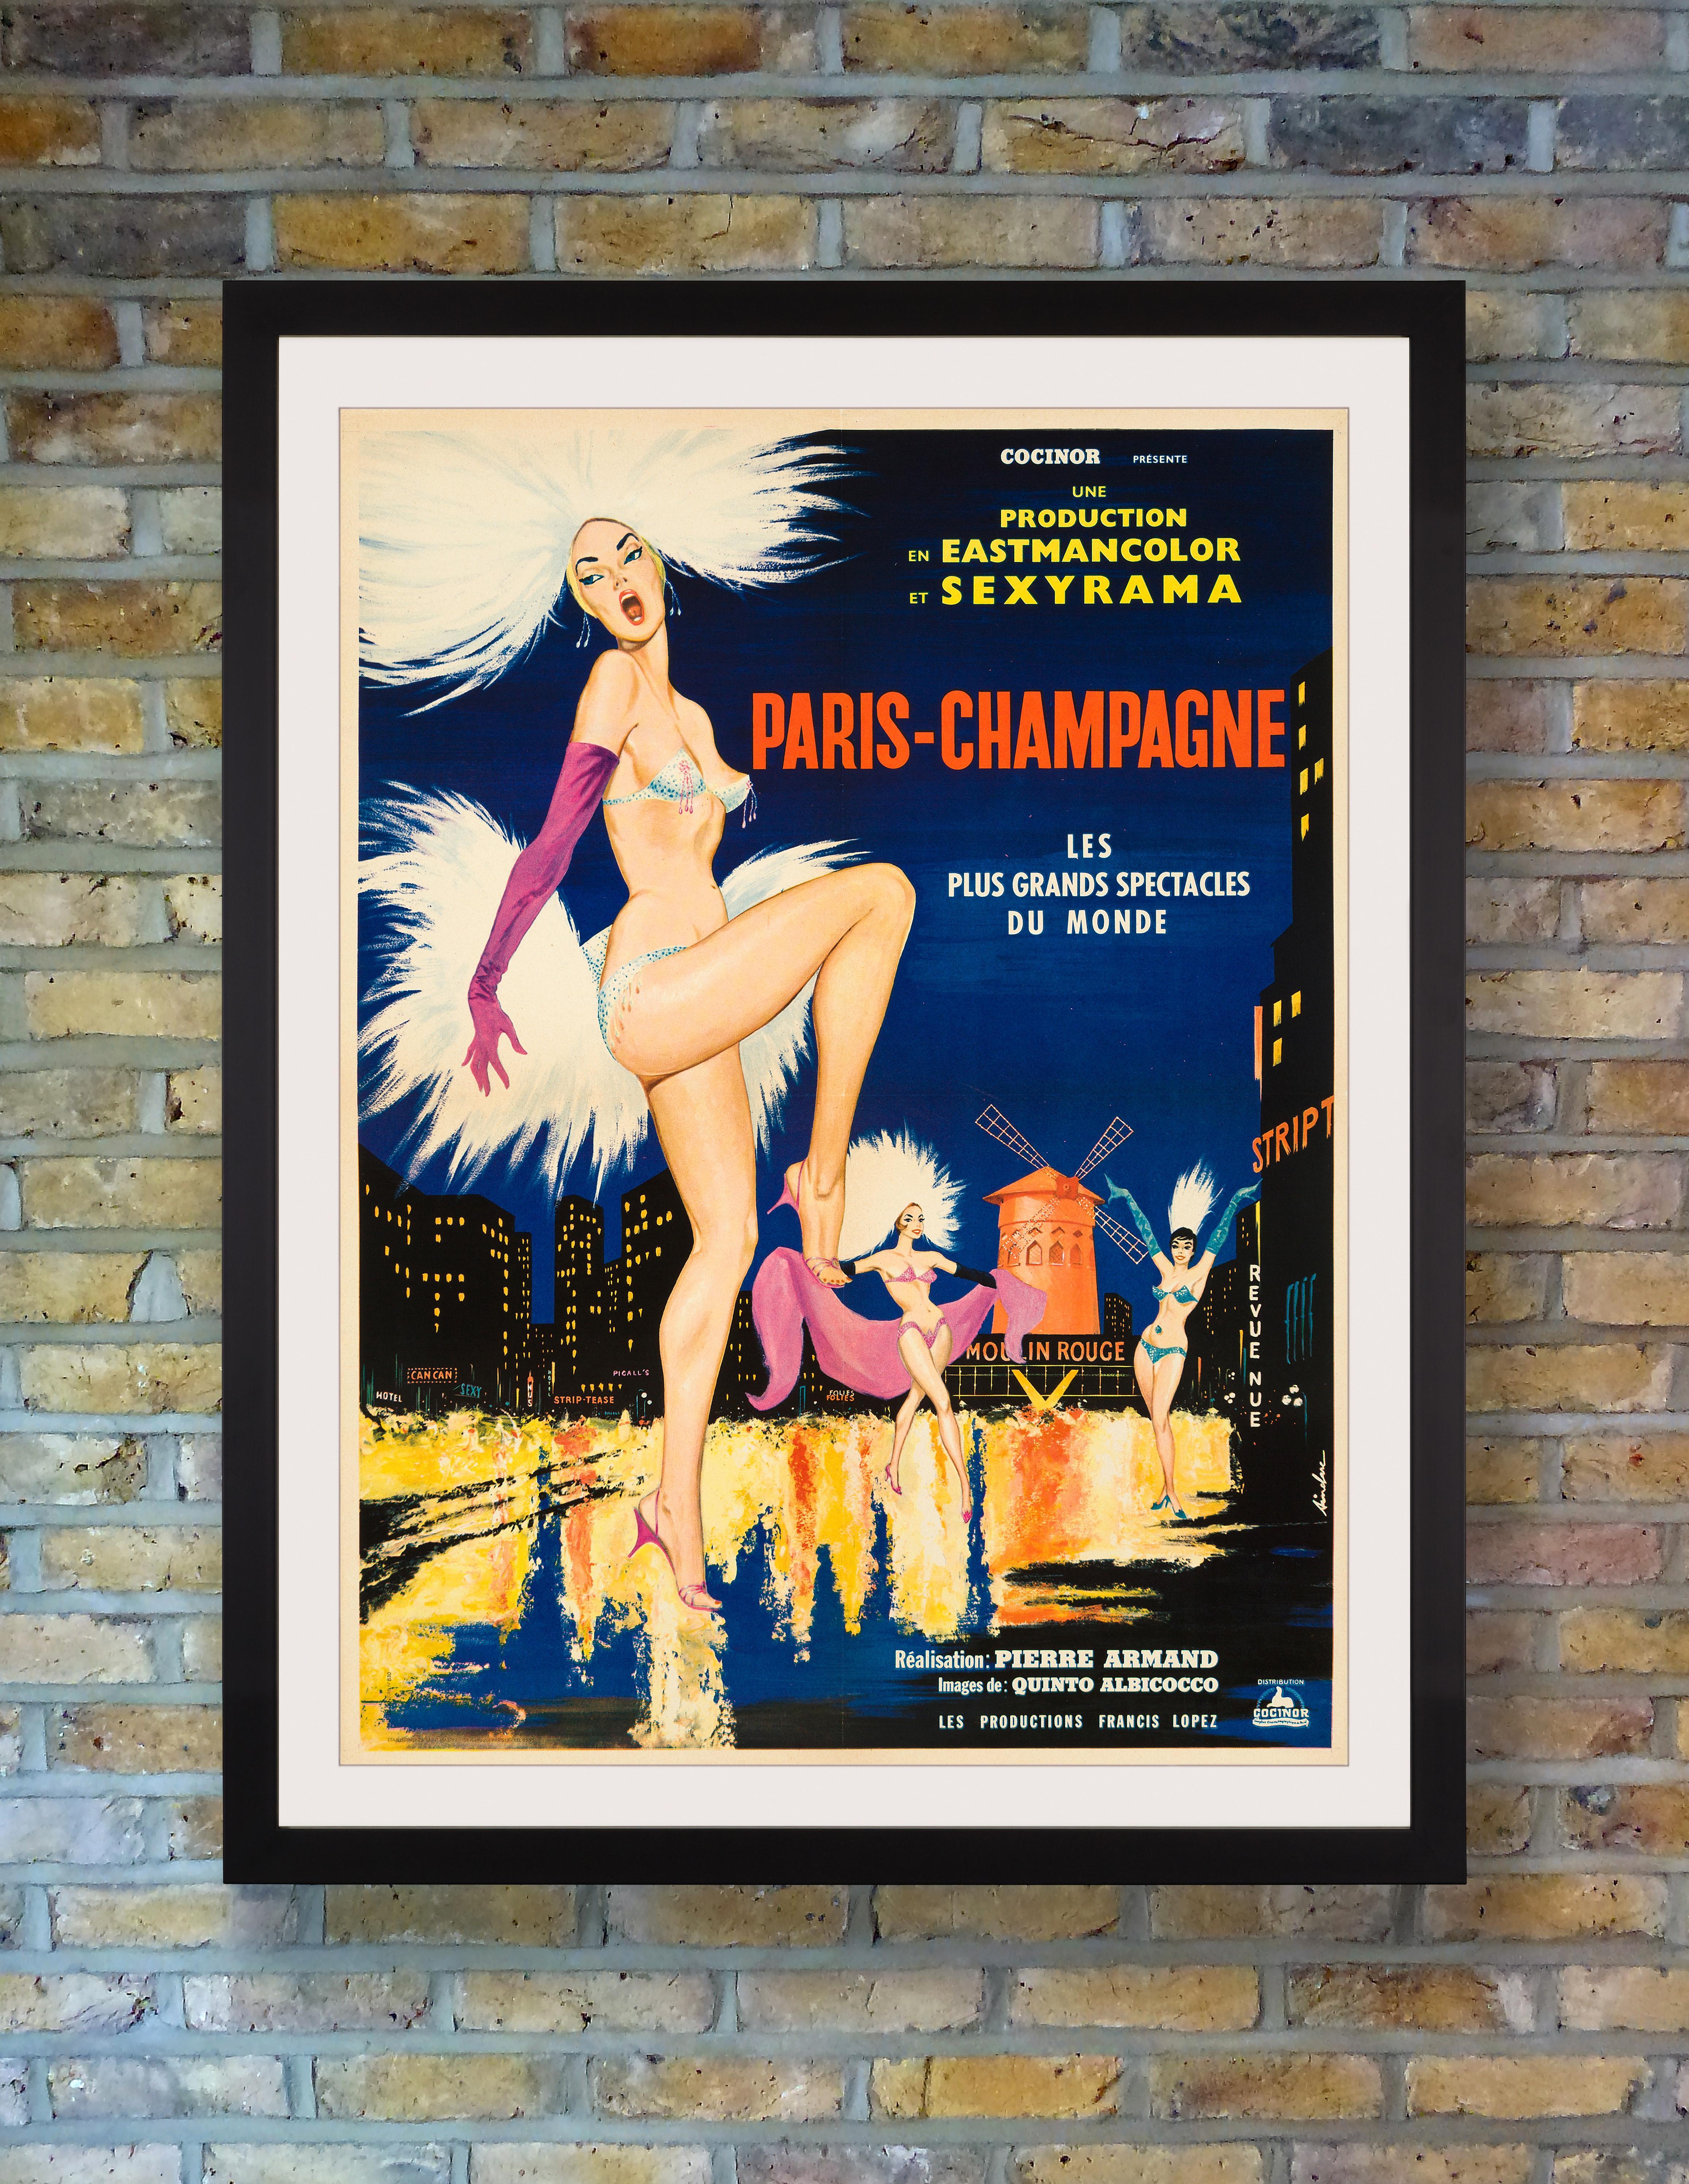 'Paris-Champagne' Original Vintage French Movie Poster, 1964 - Post-Impressionist Art by Sinclare